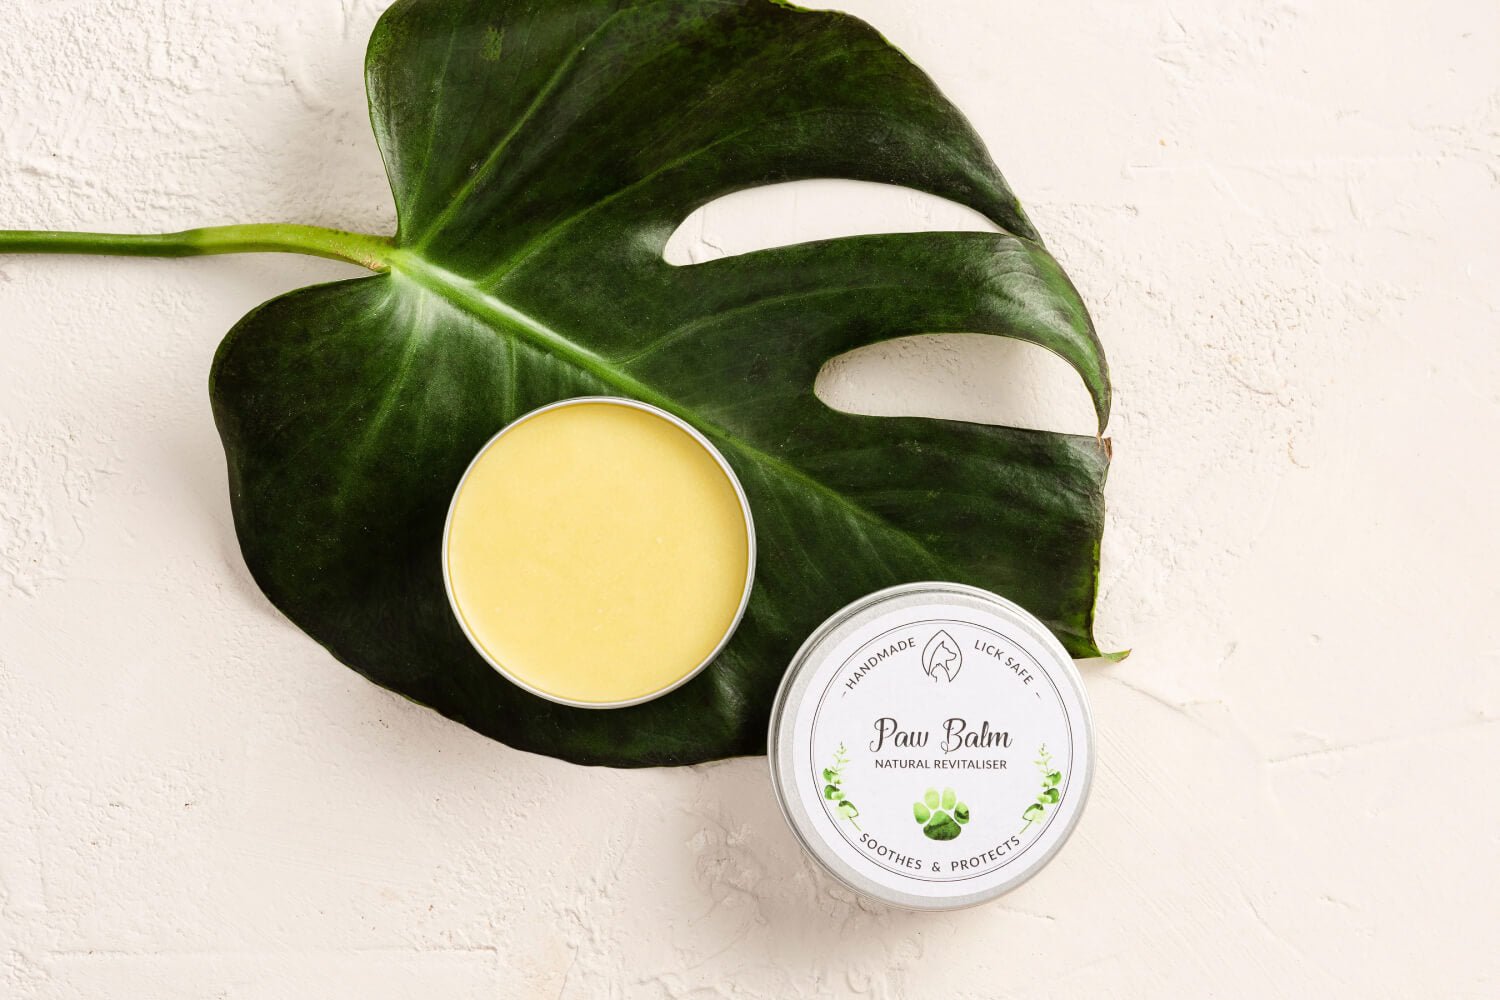 An image of dog paw balm on a green leaf